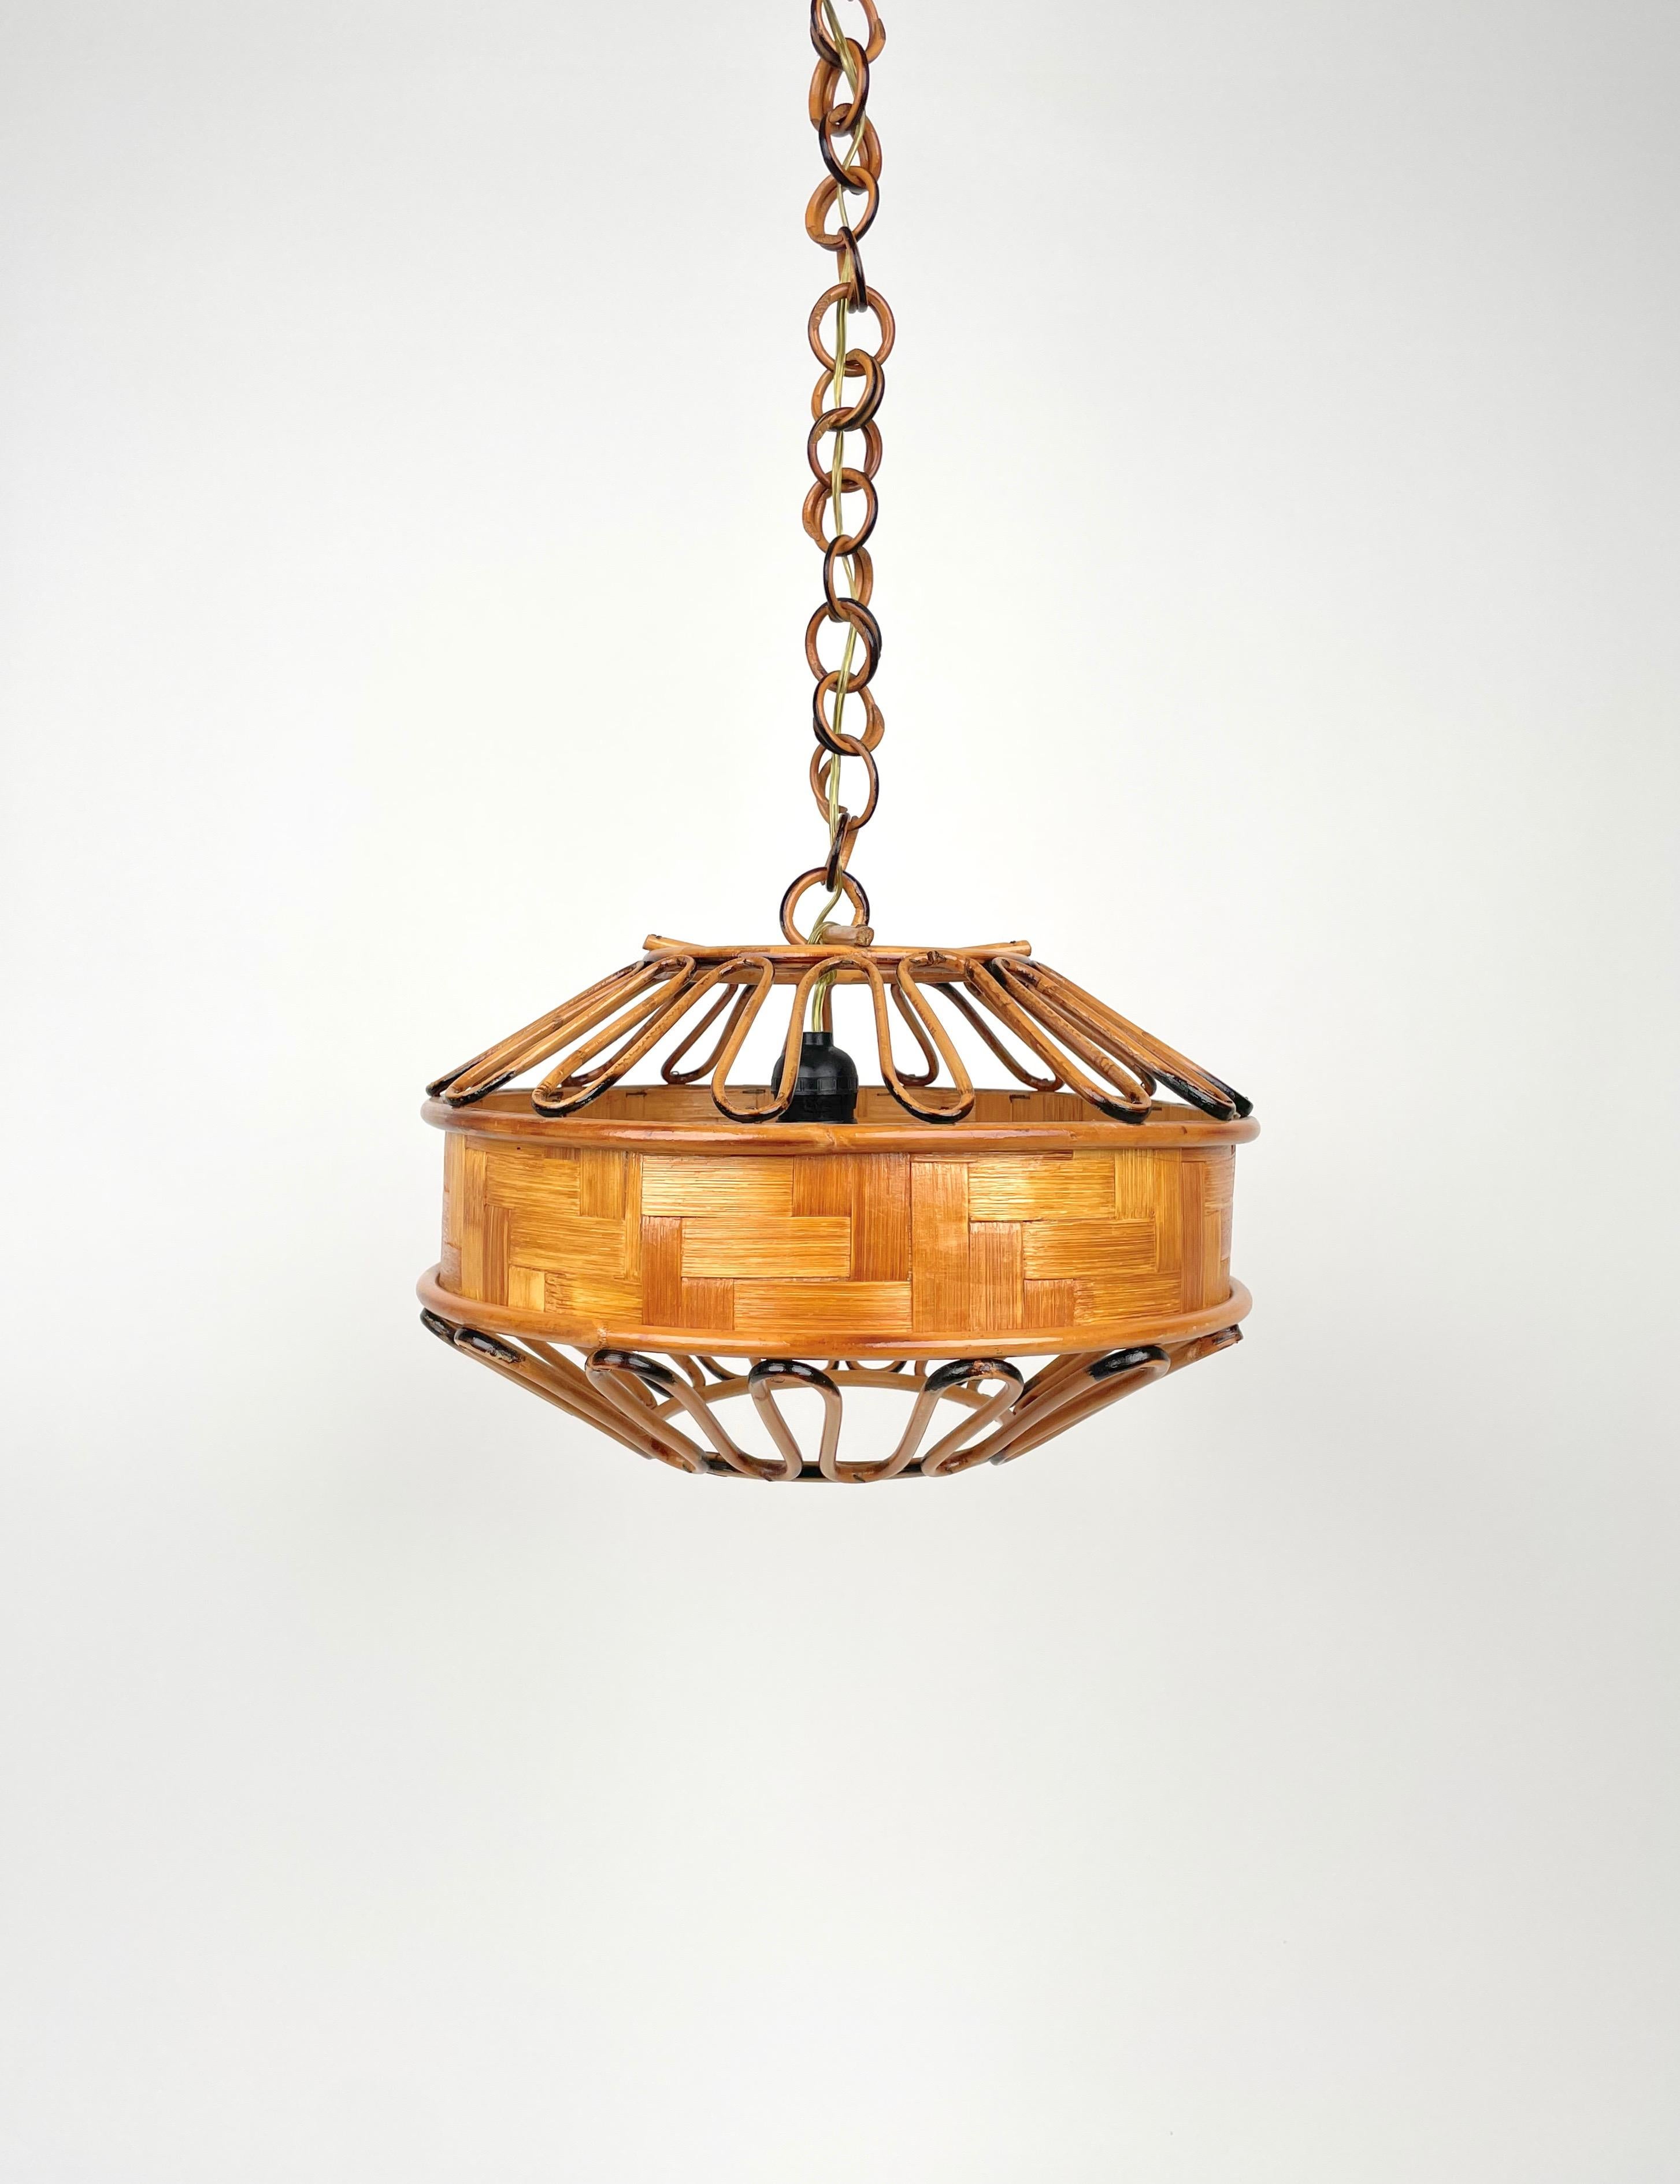 Chandelier in bamboo and rattan with chain. 

Made in Italy in the 1960s.